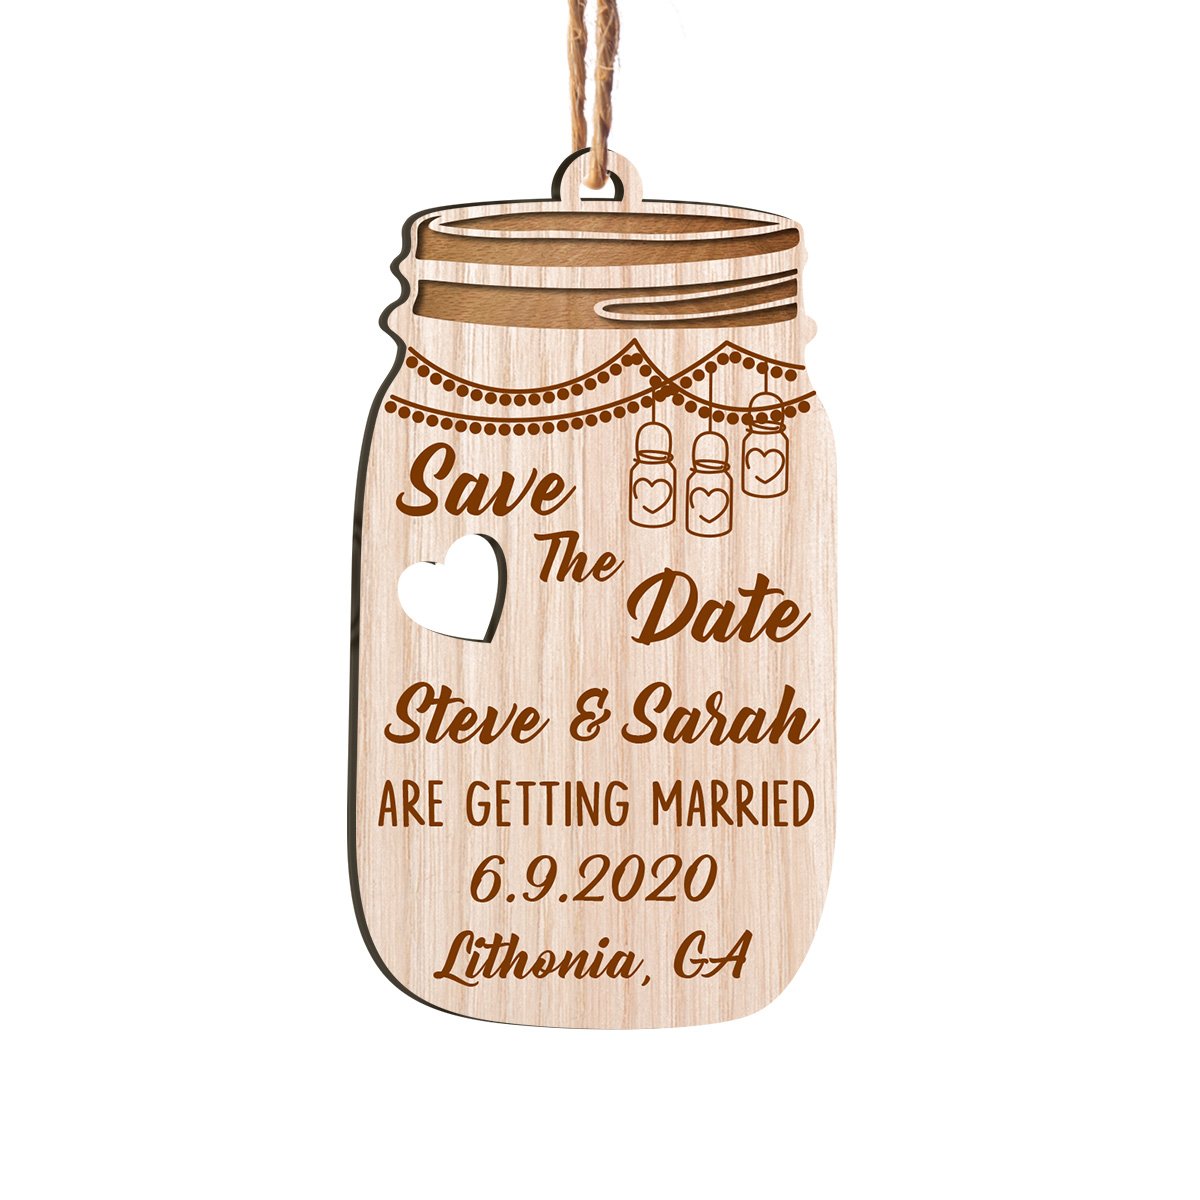 Save The Date Personalizedwitch Personalized Printed Wood Ornament